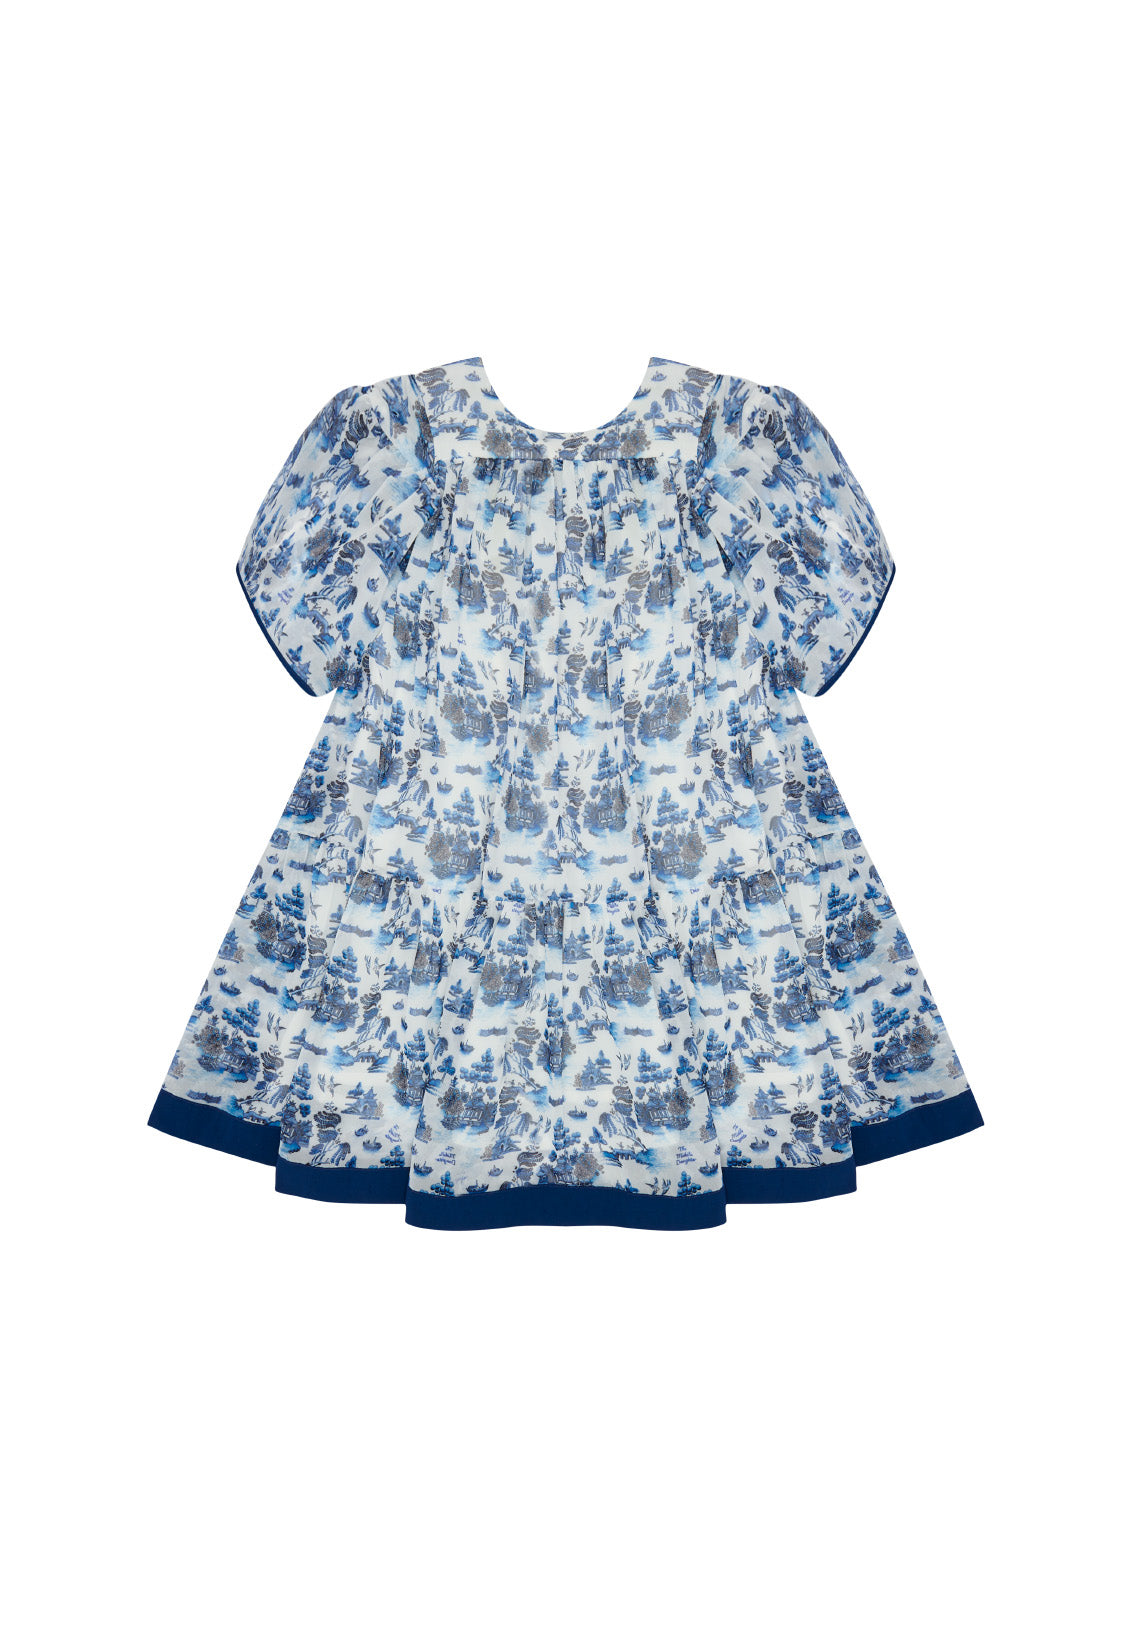 THE MIDDLE DAUGHTER "FLOAT YOUR BOAT" WILLOW PRINT DRESS